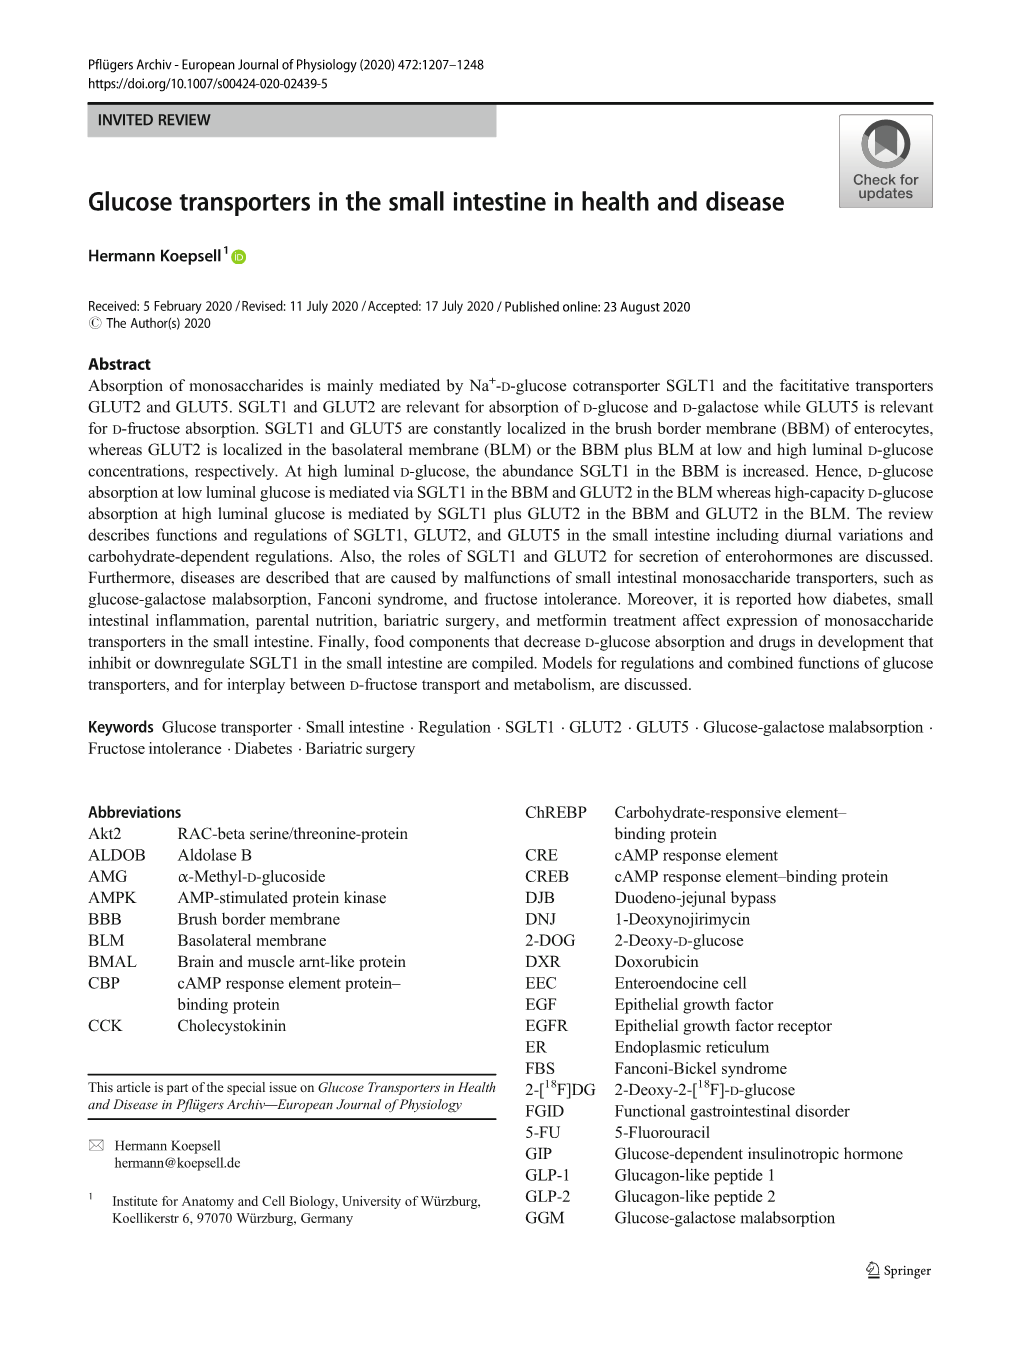 Glucose Transporters in the Small Intestine in Health and Disease